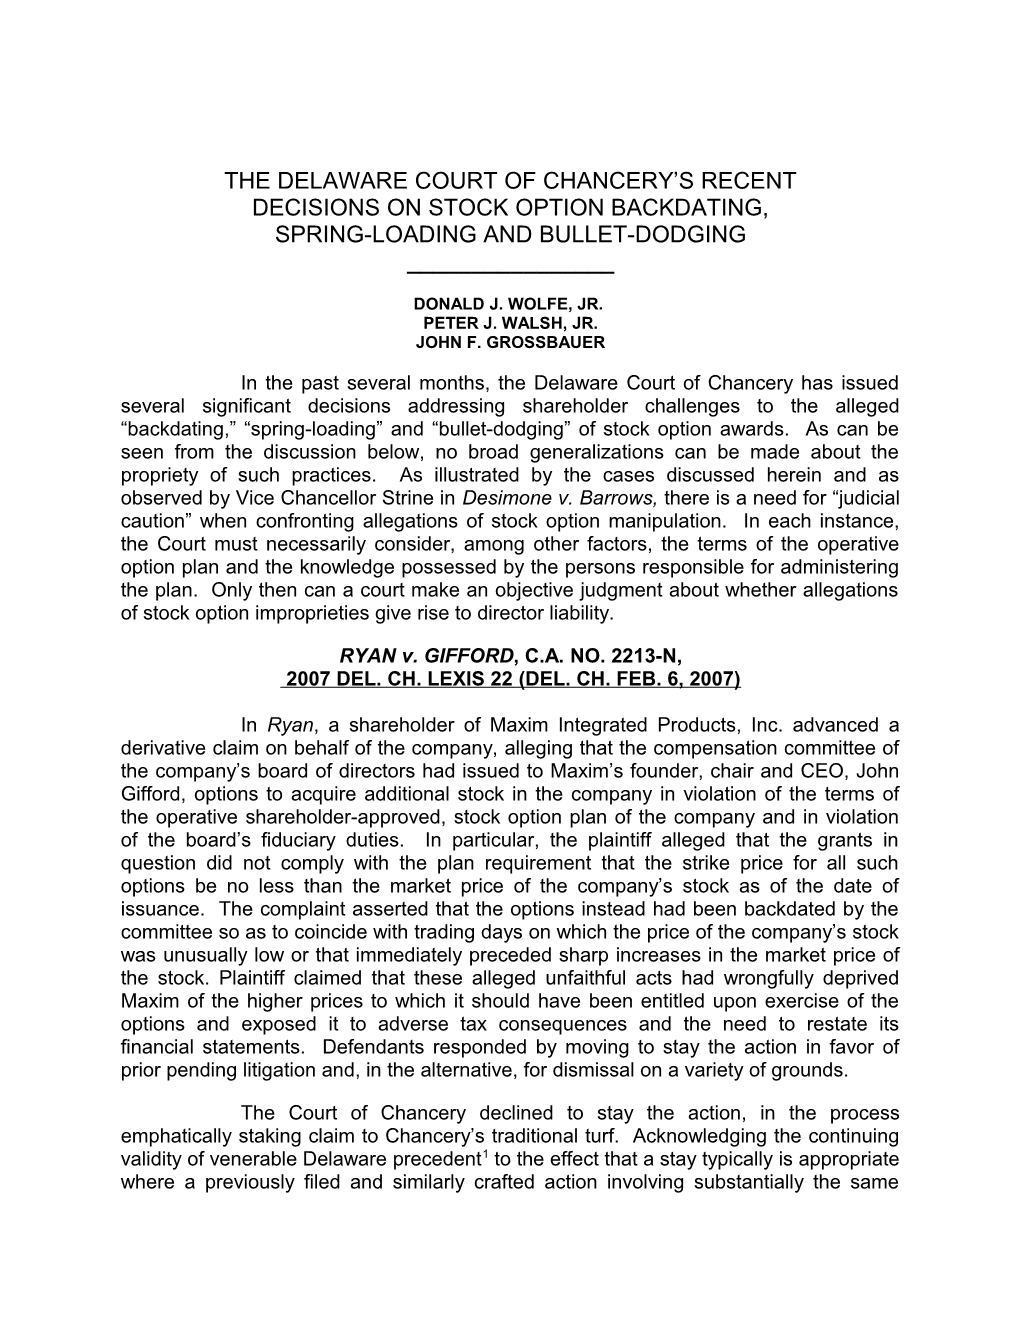 The Delaware Court of Chancery in Contemporaneous Decisions Addresses Backdating And